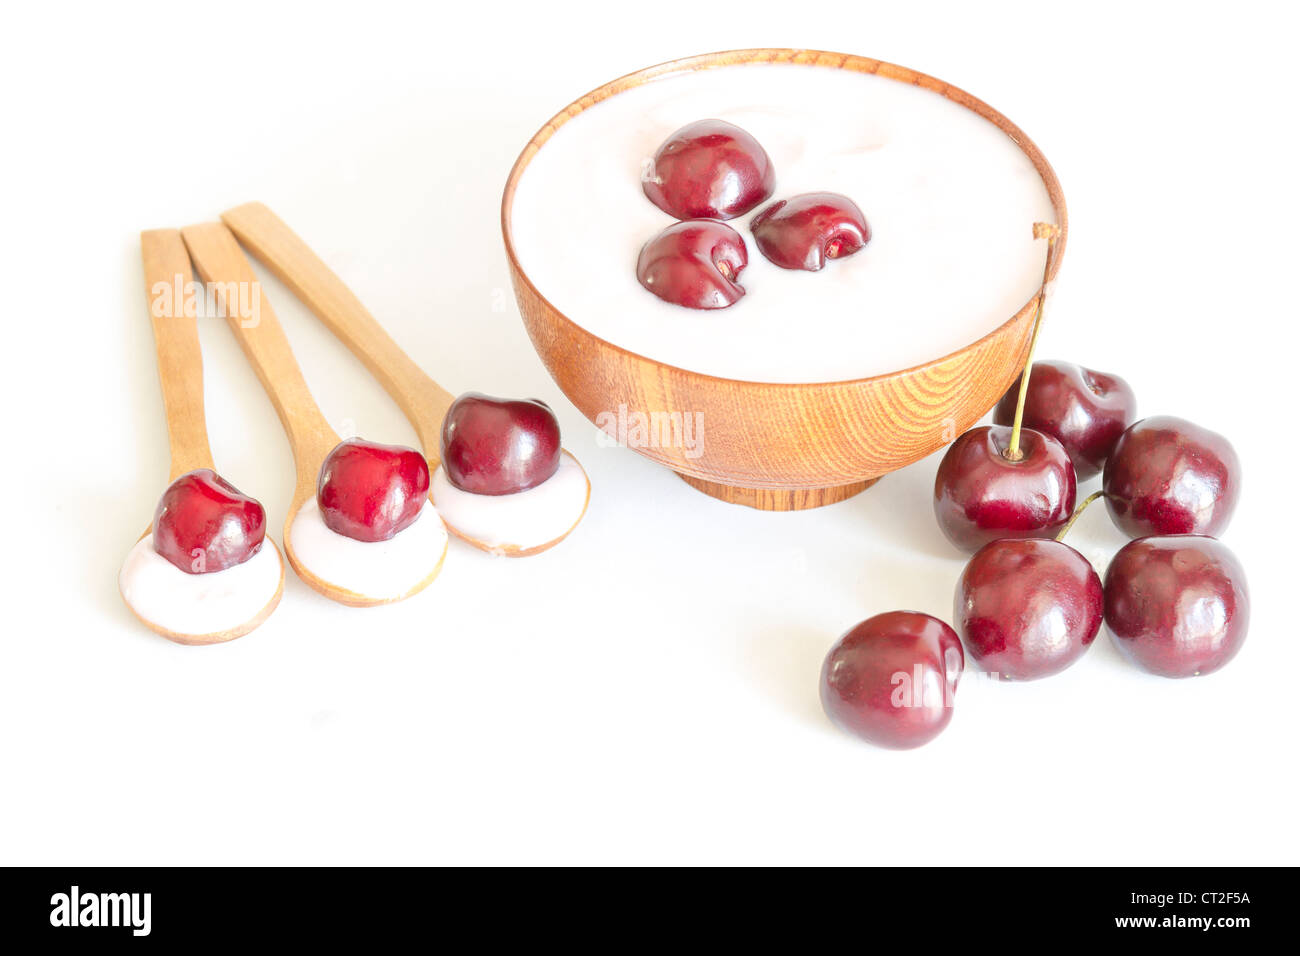 Top view of a bowl with cherries yoghurt, wooden spoon with cherries and yogurt. Stock Photo